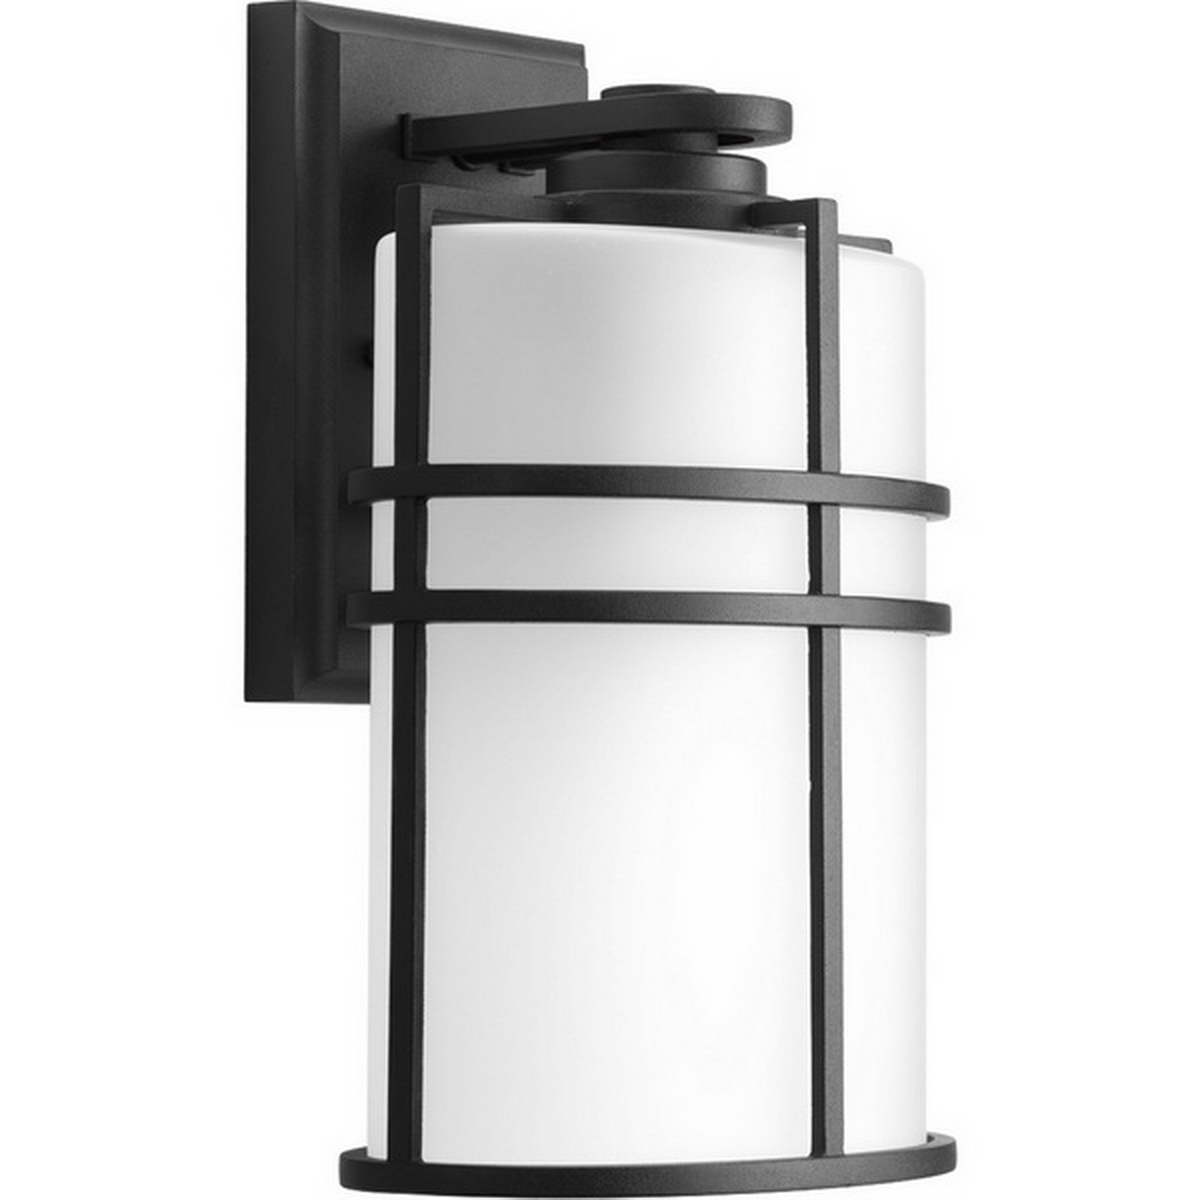 Format 12 in. Outdoor Wall Sconce Black Finish